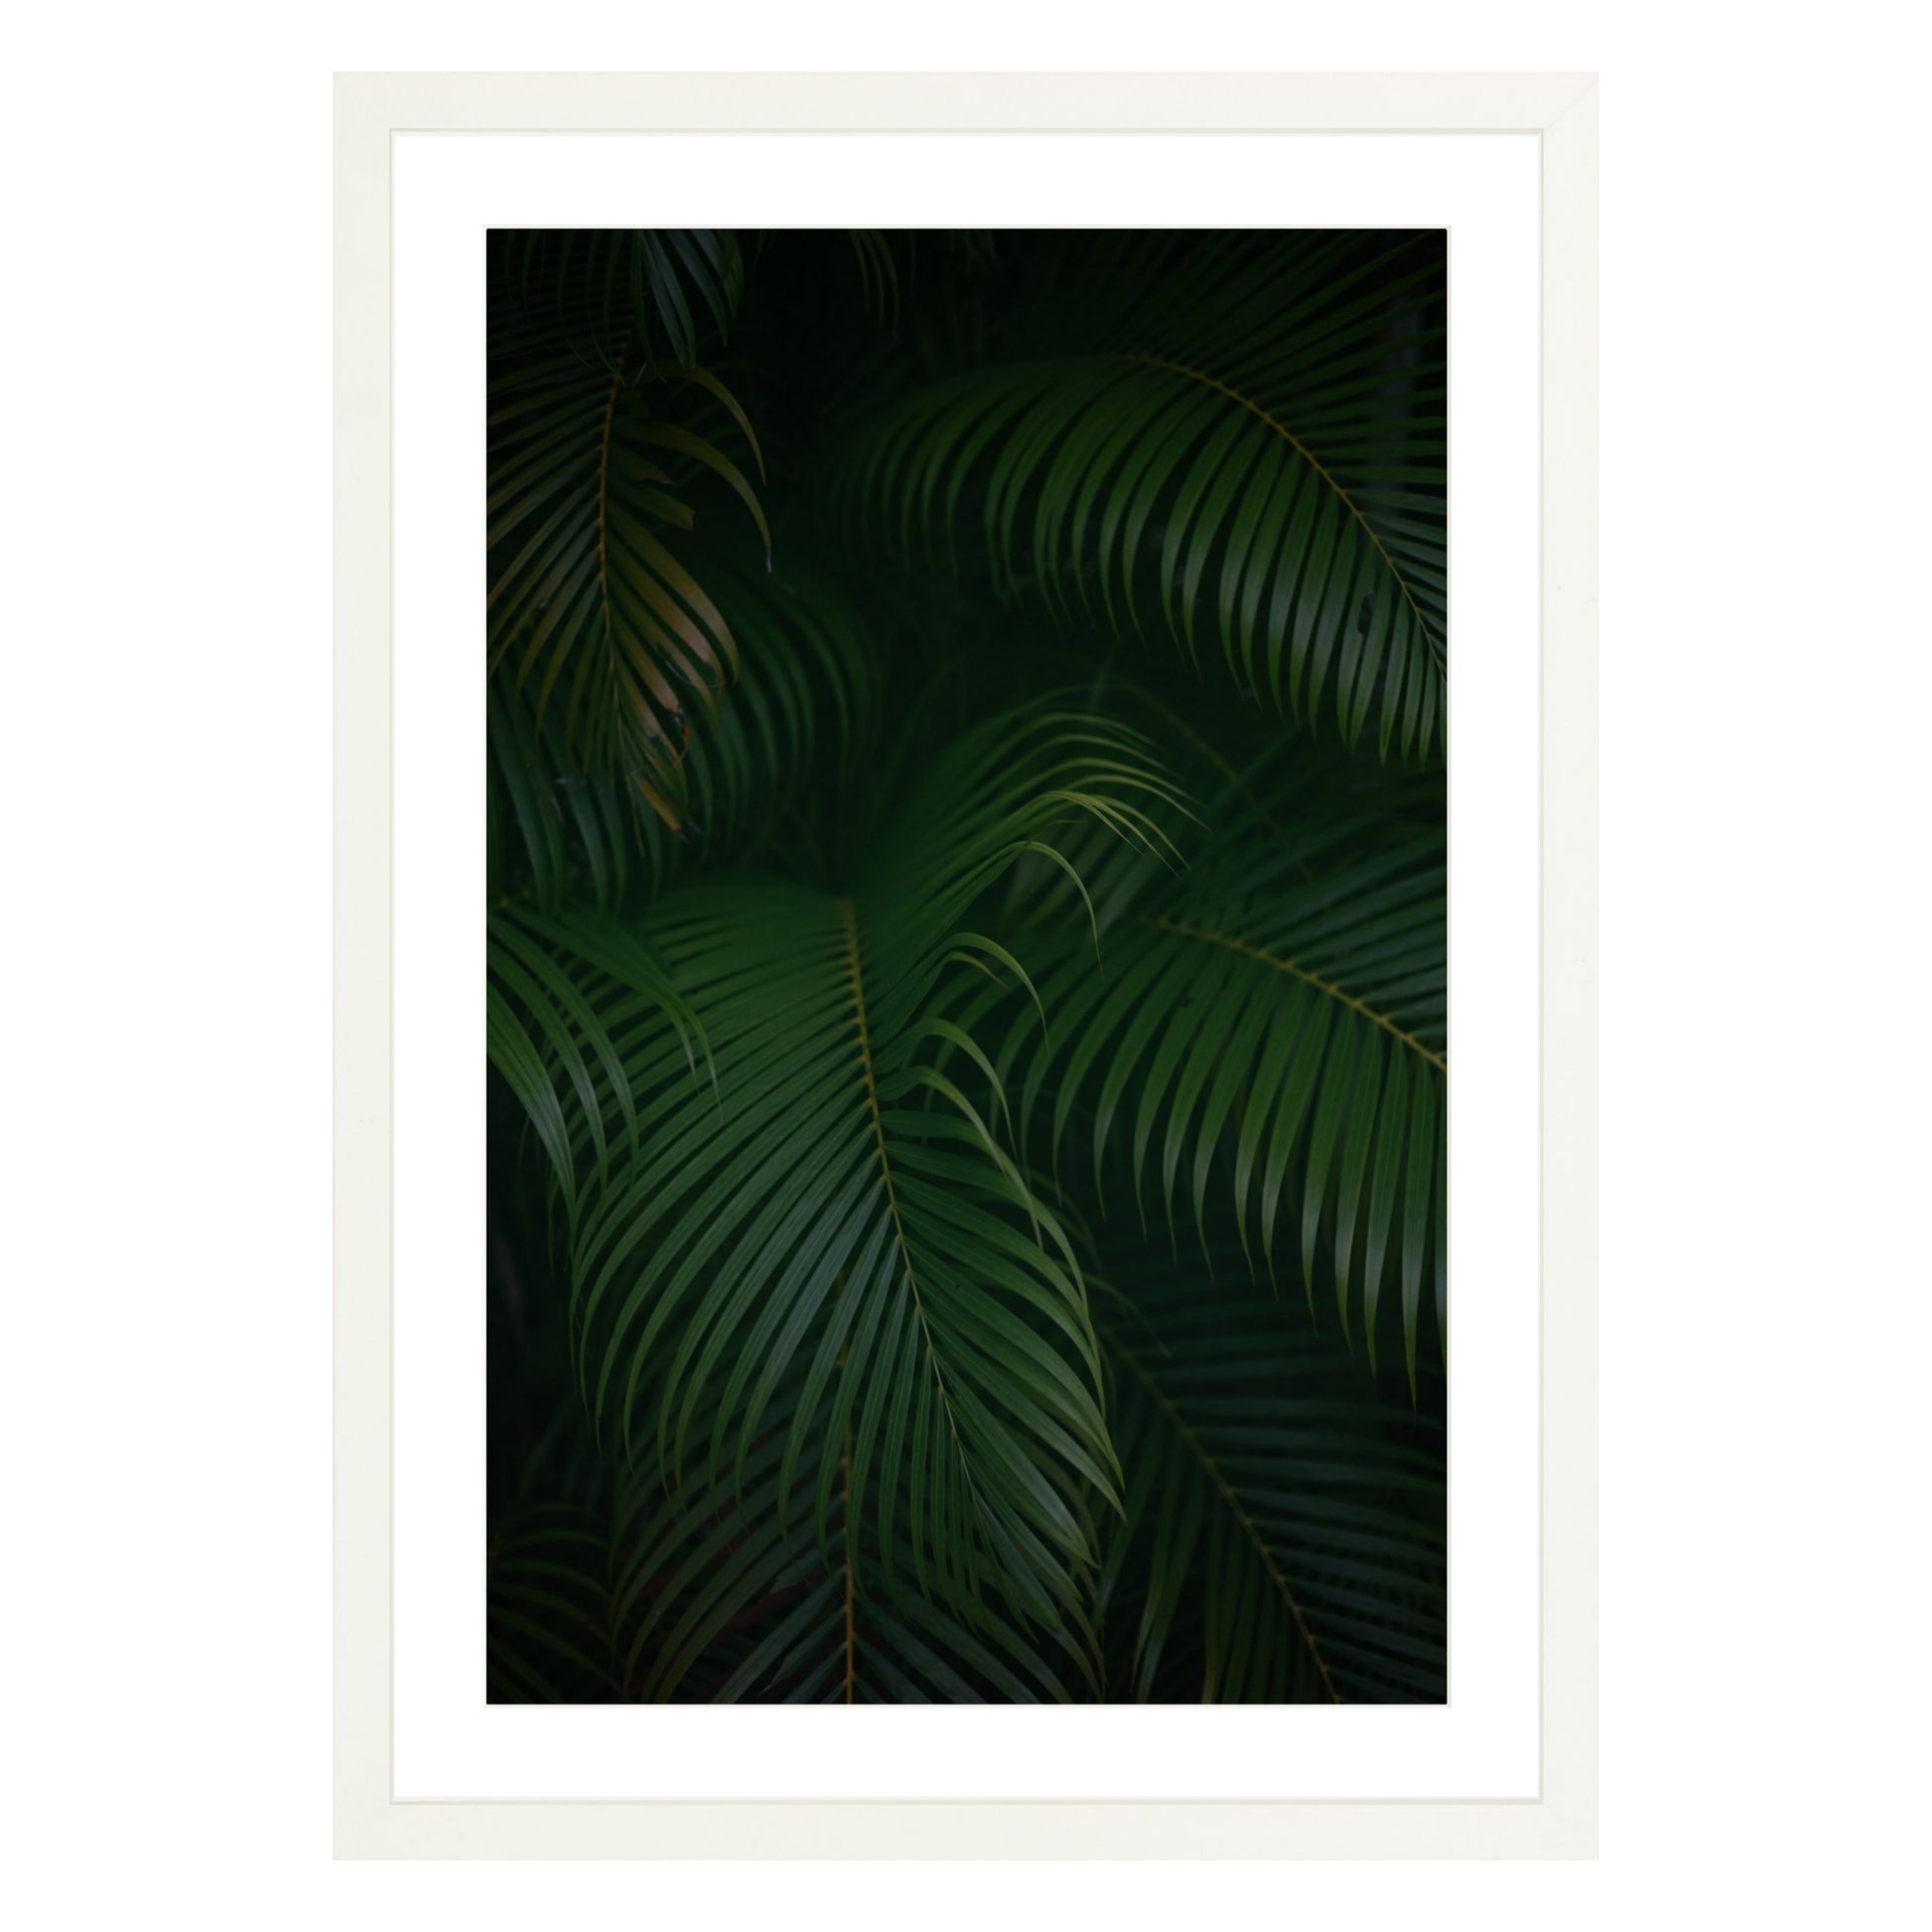 Photograph of palm branches at night in a white wood frame with white matPhotograph of palm branches at night in a white wood frame with white mat